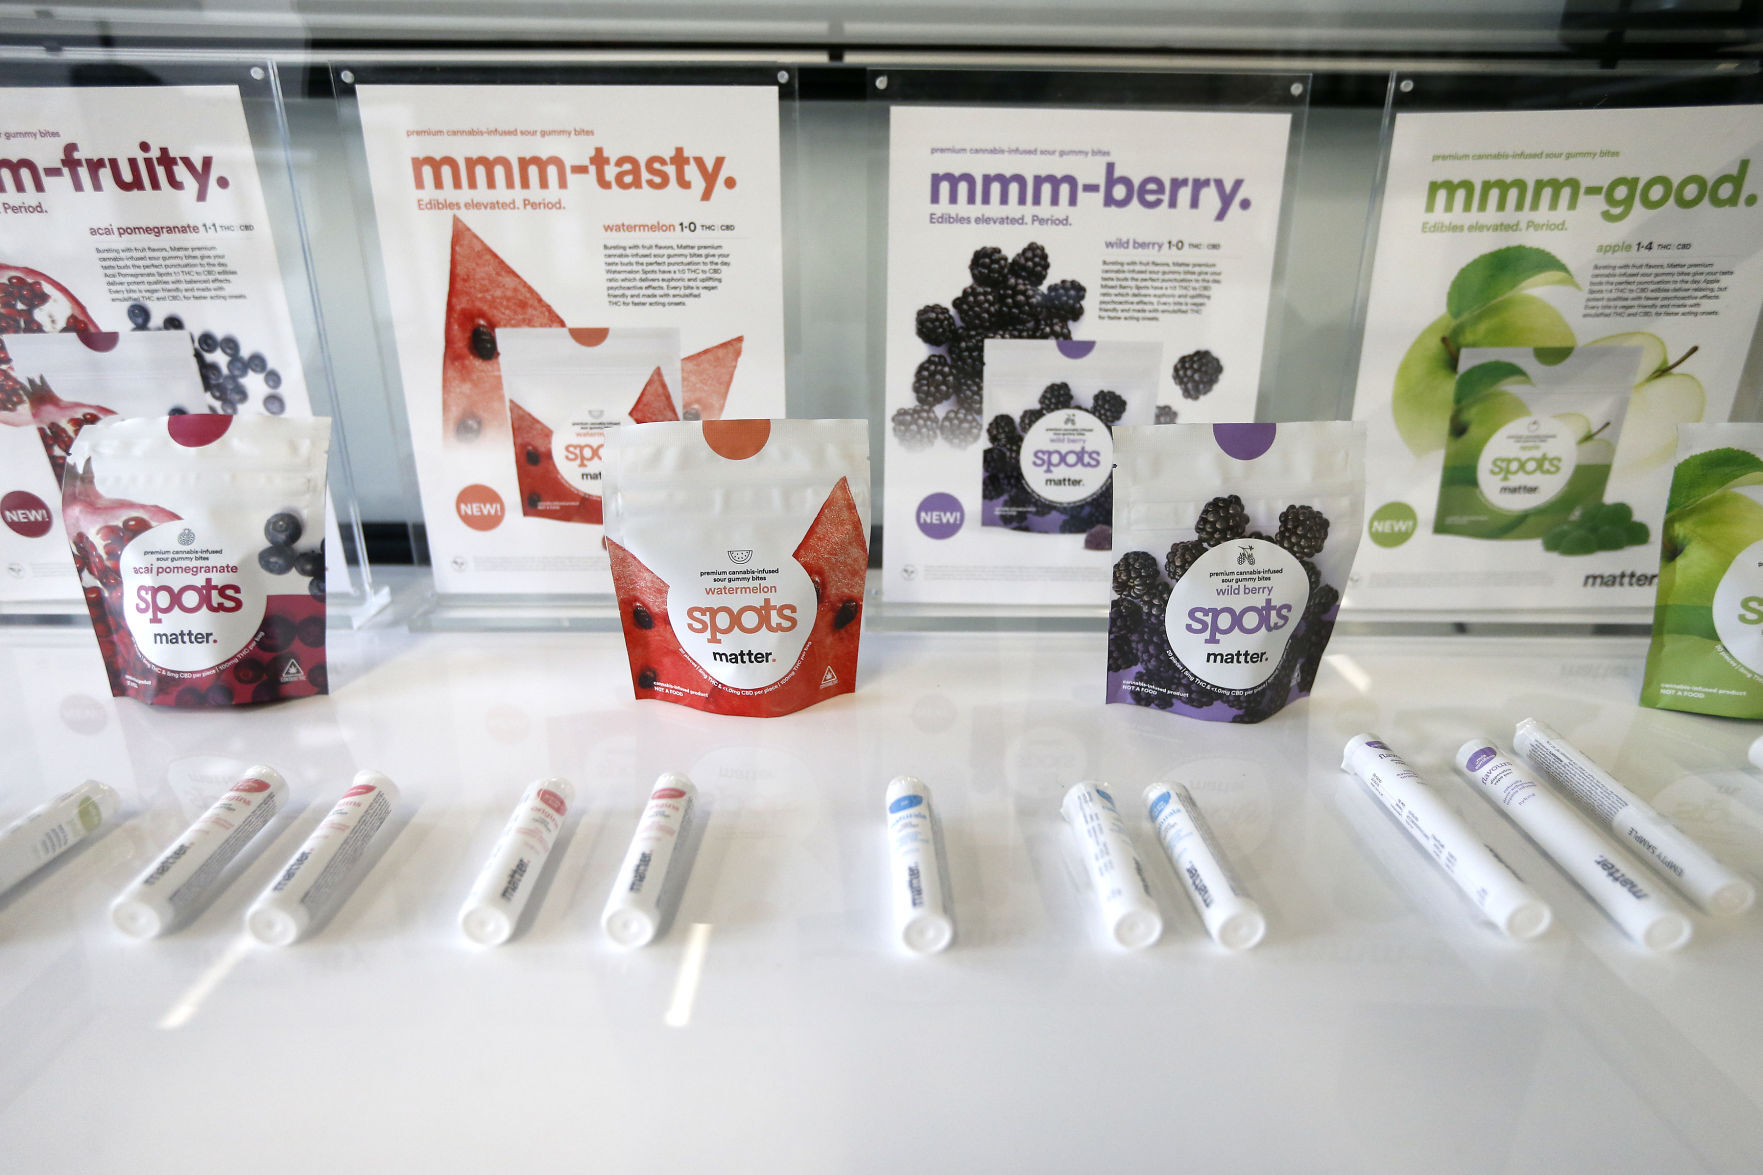 Some of the products are on display at the Verilife dispensary in Galena, Ill., on Wednesday. PHOTO CREDIT: Dave Kettering